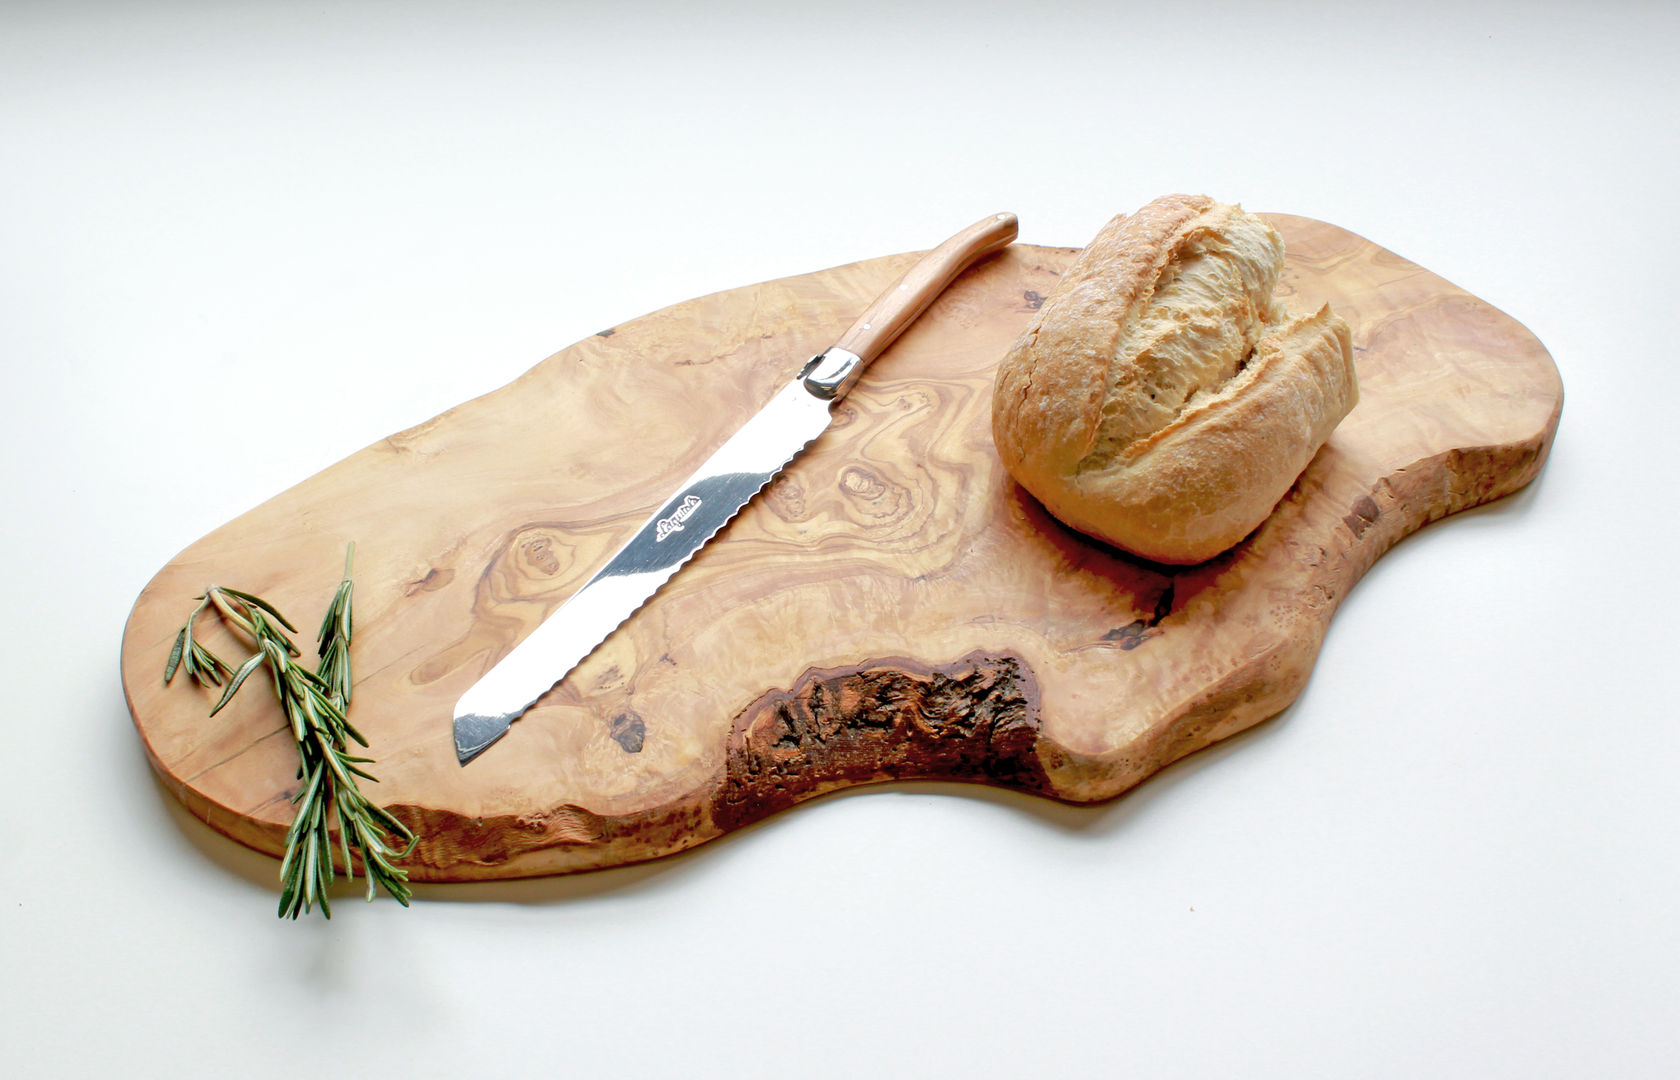 Large Rustic Olive Wood Serving Board, The Rustic Dish The Rustic Dish Dapur Gaya Rustic Kitchen utensils